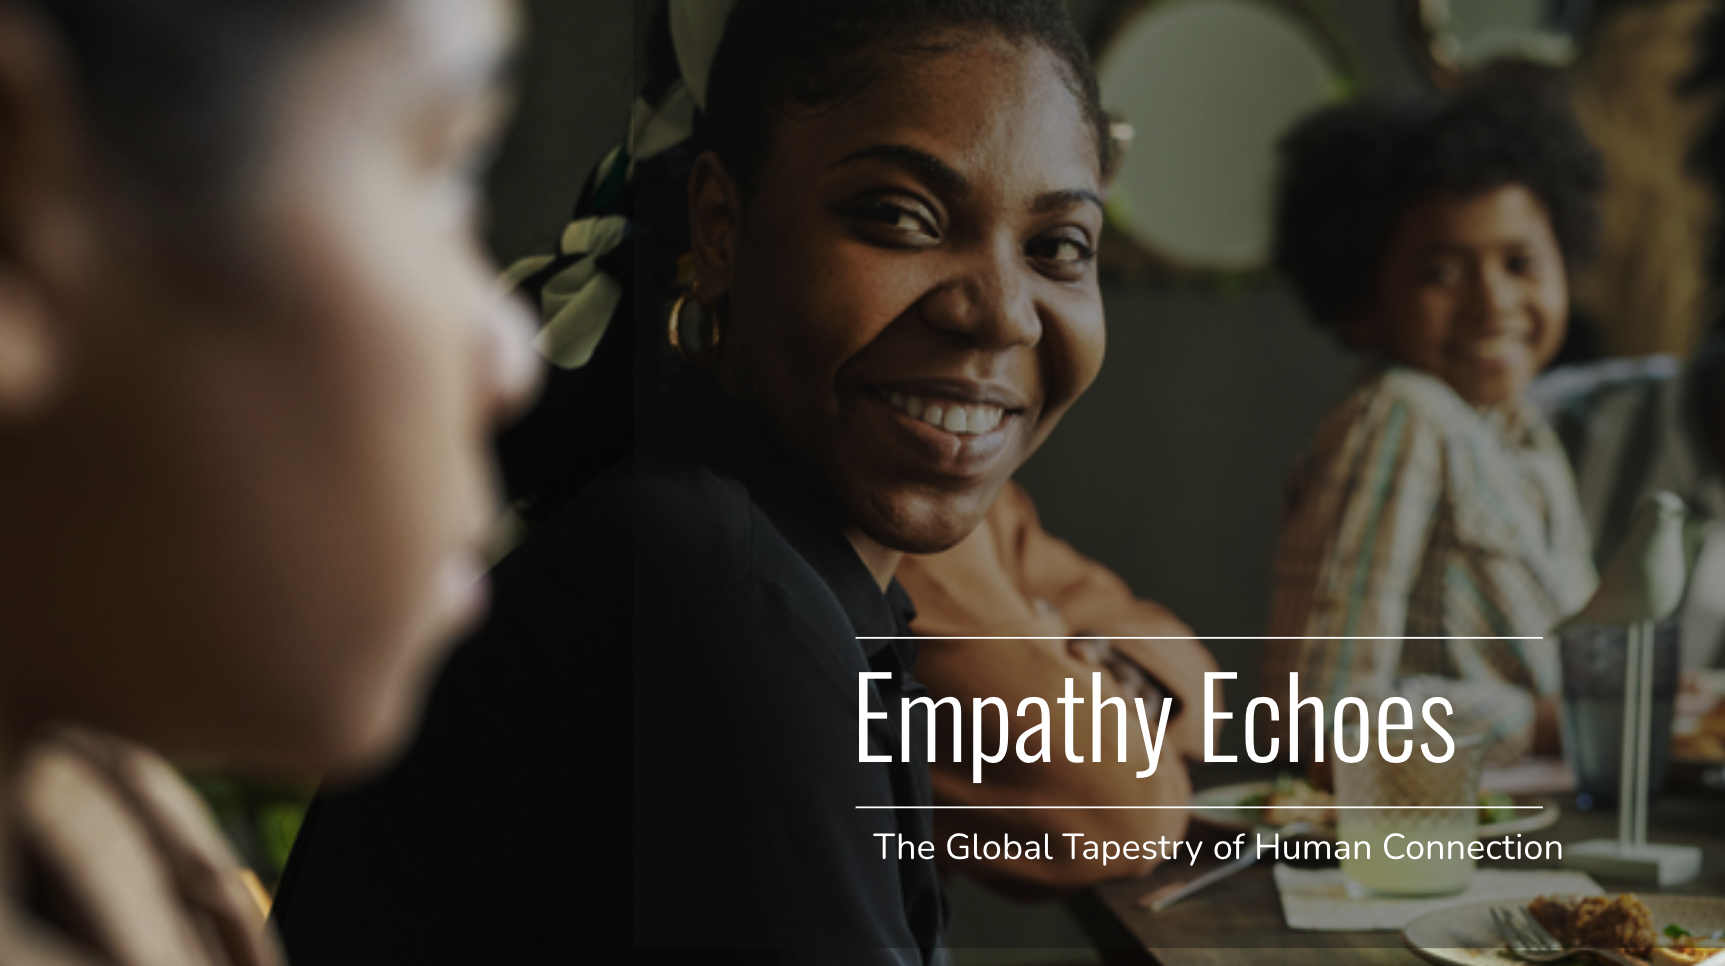 Introducing “Empathy Echoes”: A Cinematic Journey Into Global Customer Service